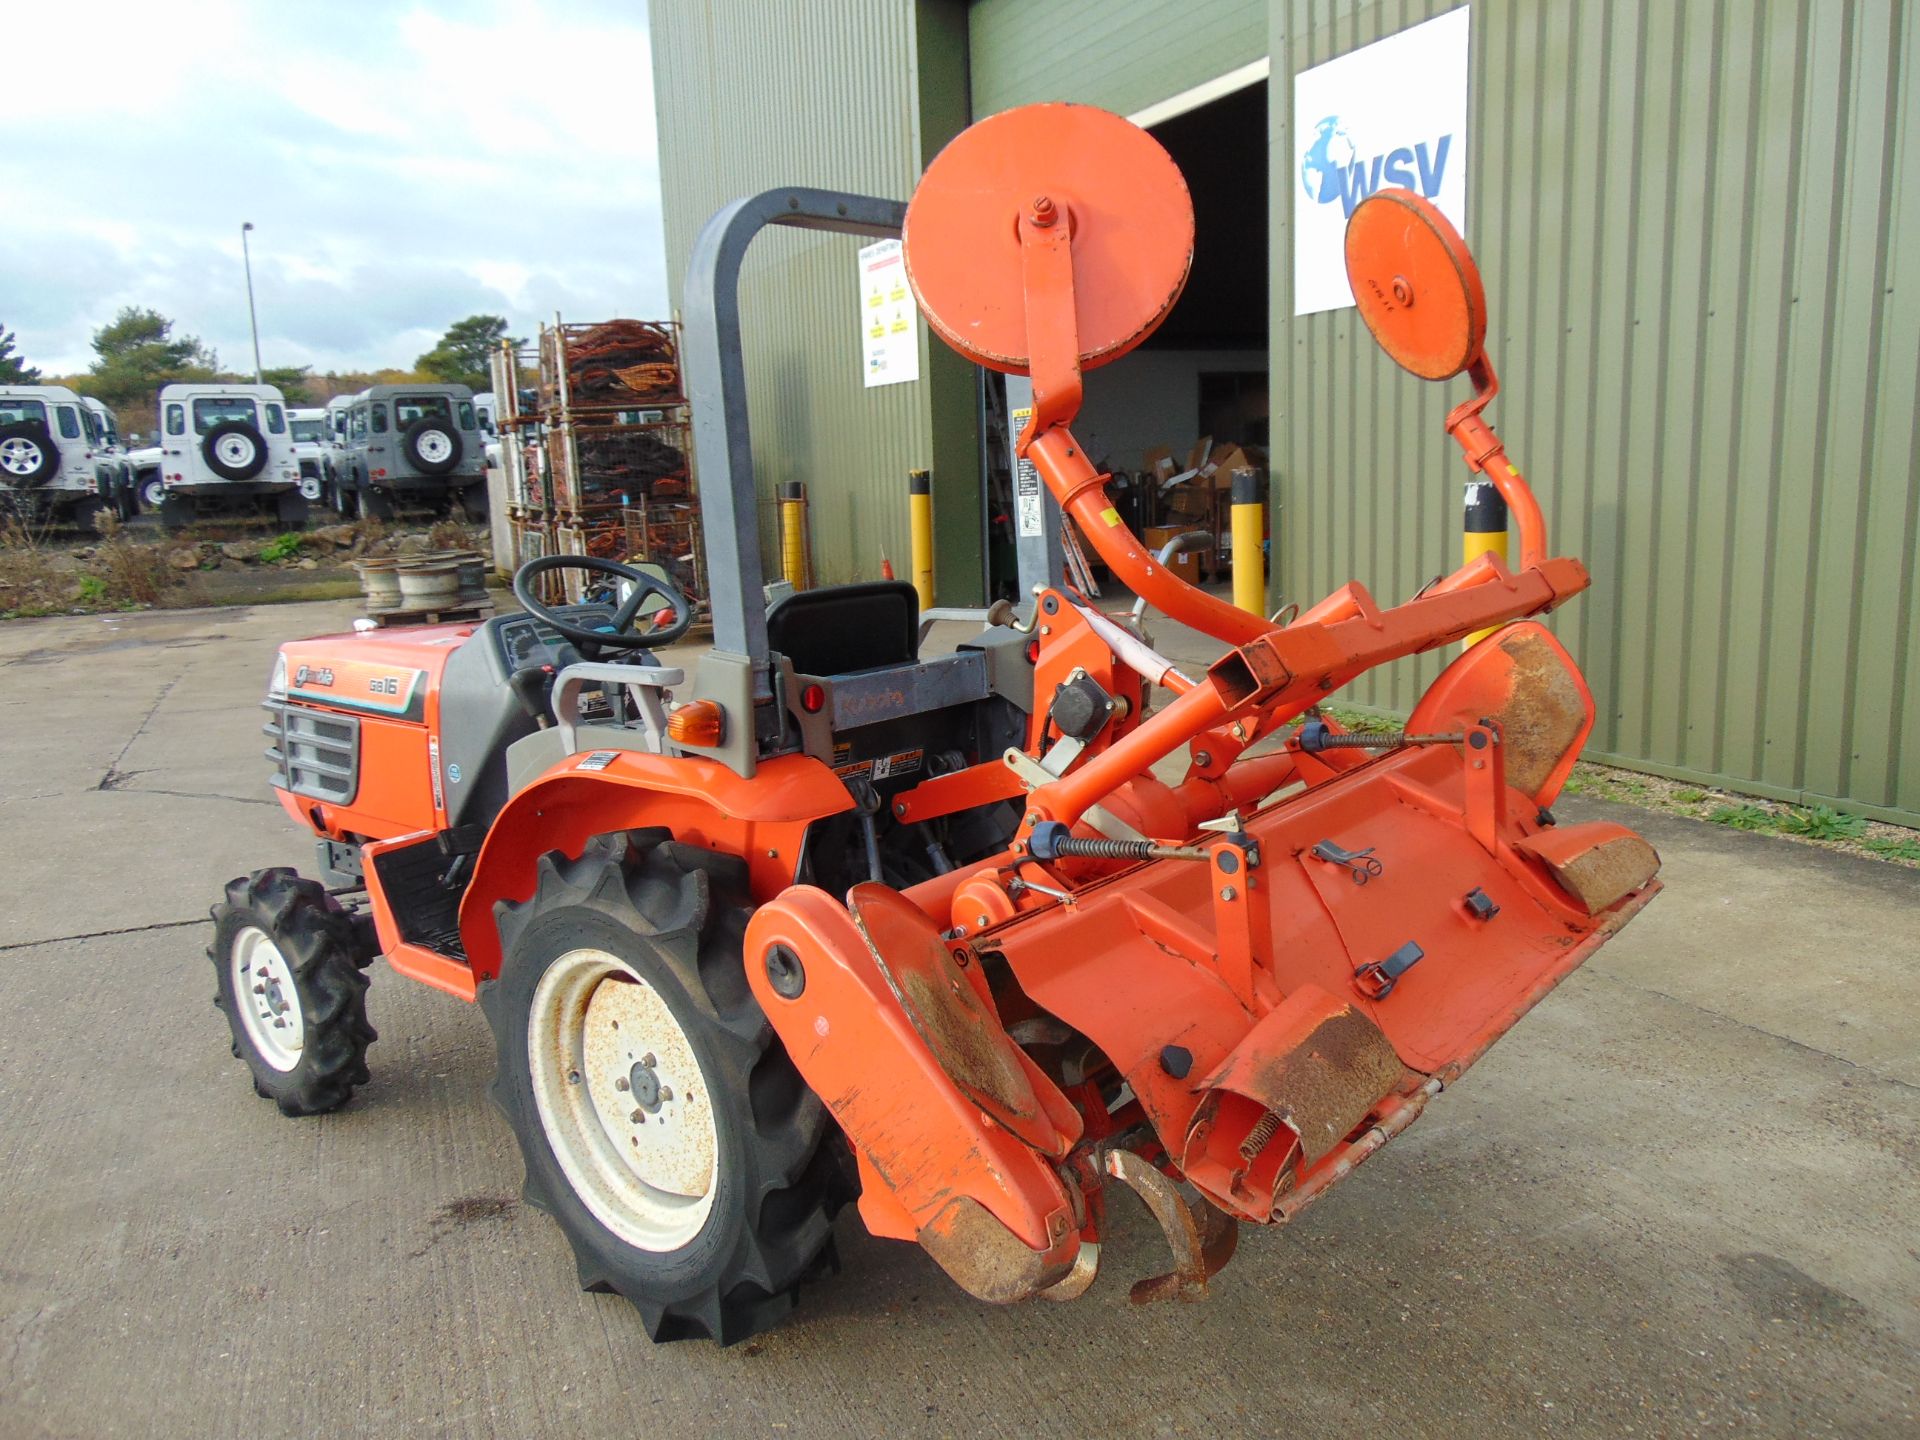 Kubota Granbia GB16 4x4 Diesel Compact Tractor c/w Rotovator ONLY 467 HOURS! - Image 8 of 24